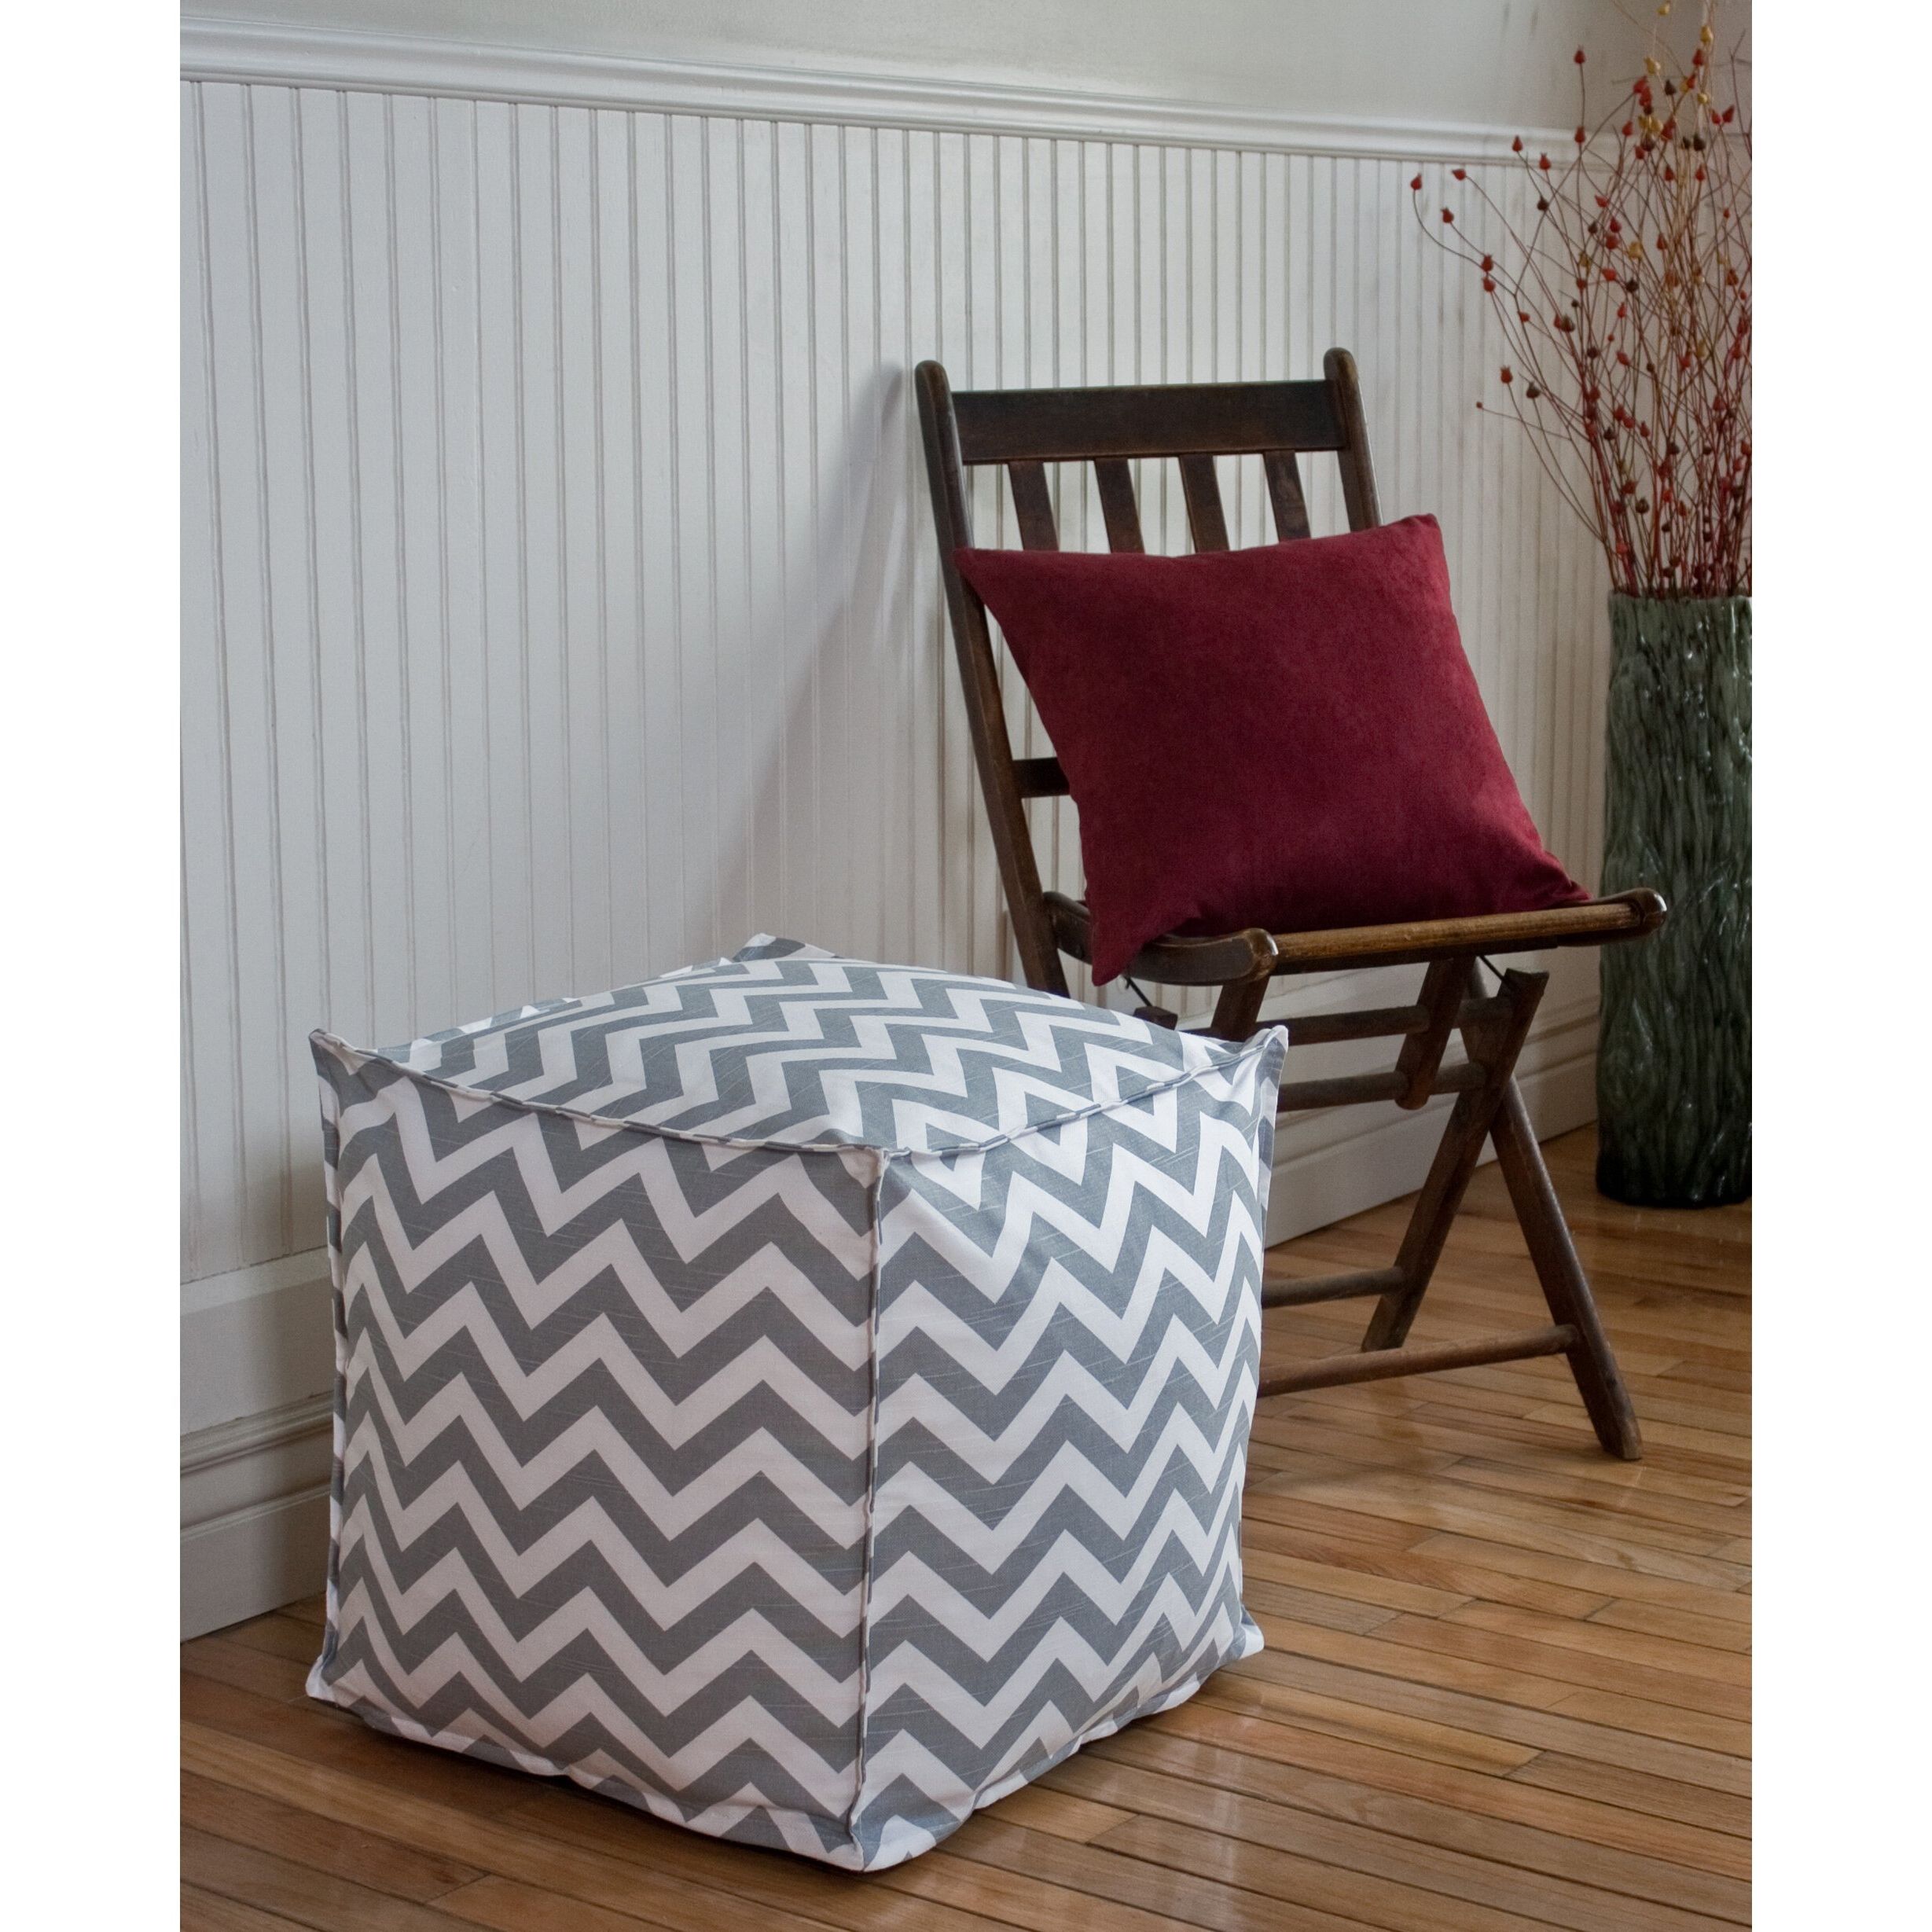 Trendy Black And White Zigzag Pouf Ottomans With Regard To Zig Zag Cube Pouf Ottoman (View 3 of 10)